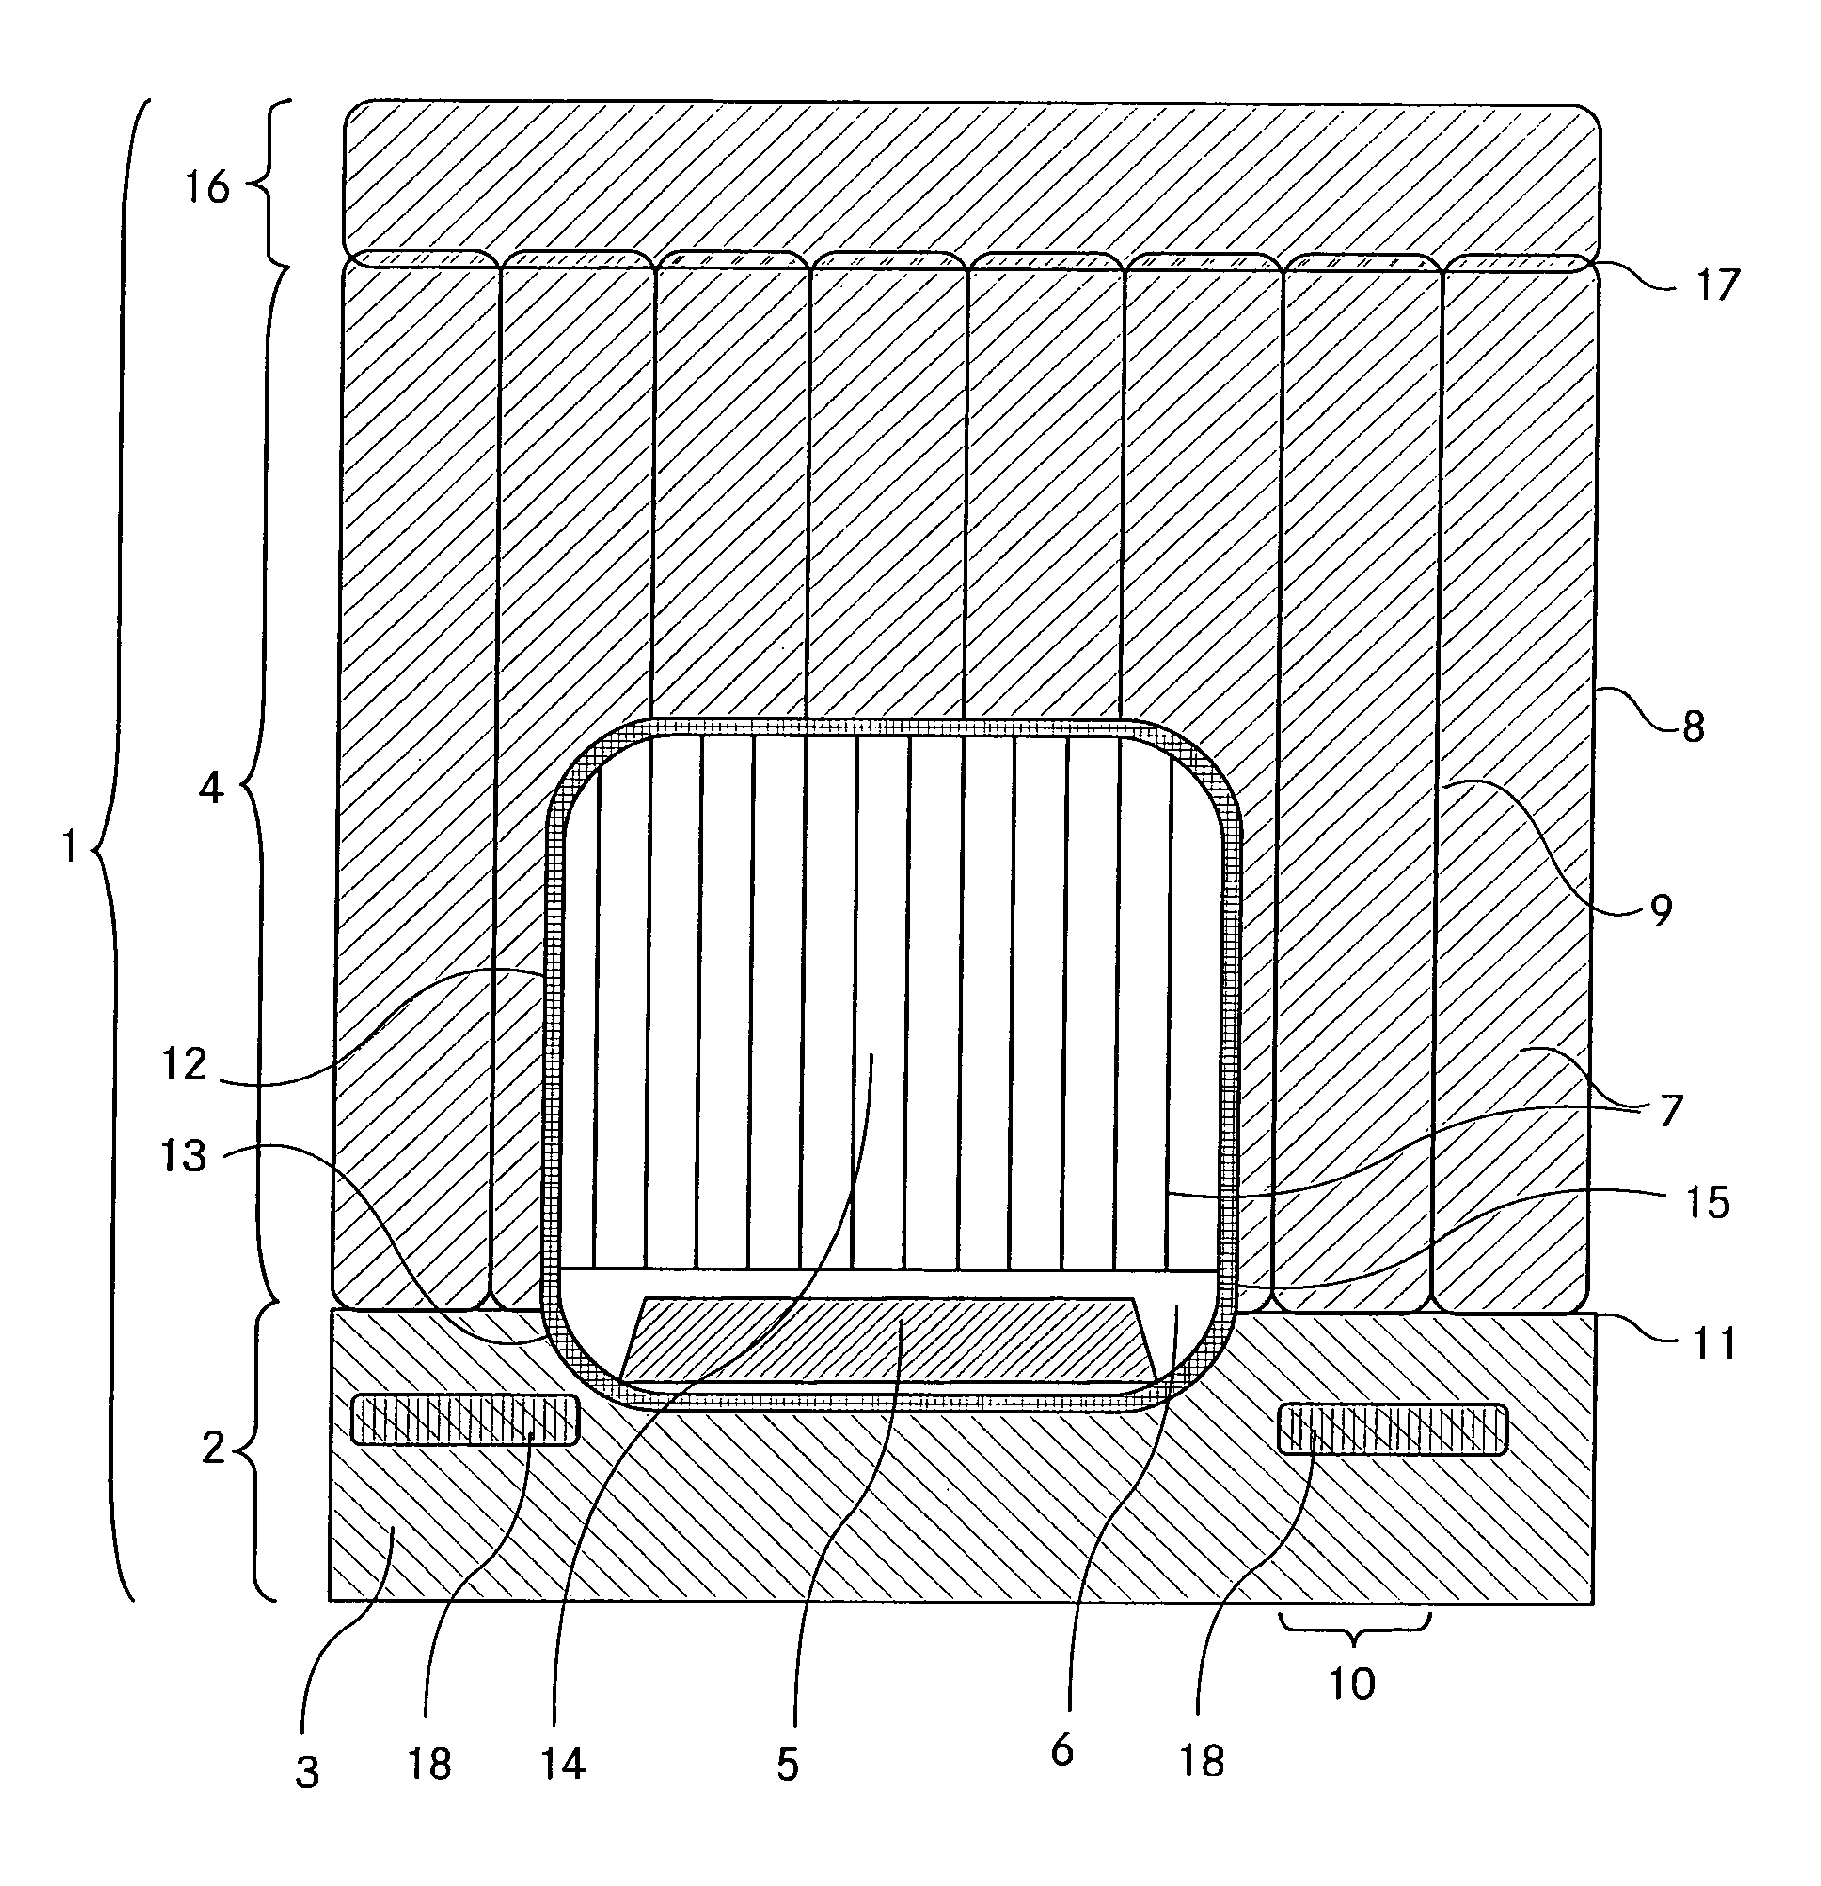 Structure having an air chamber